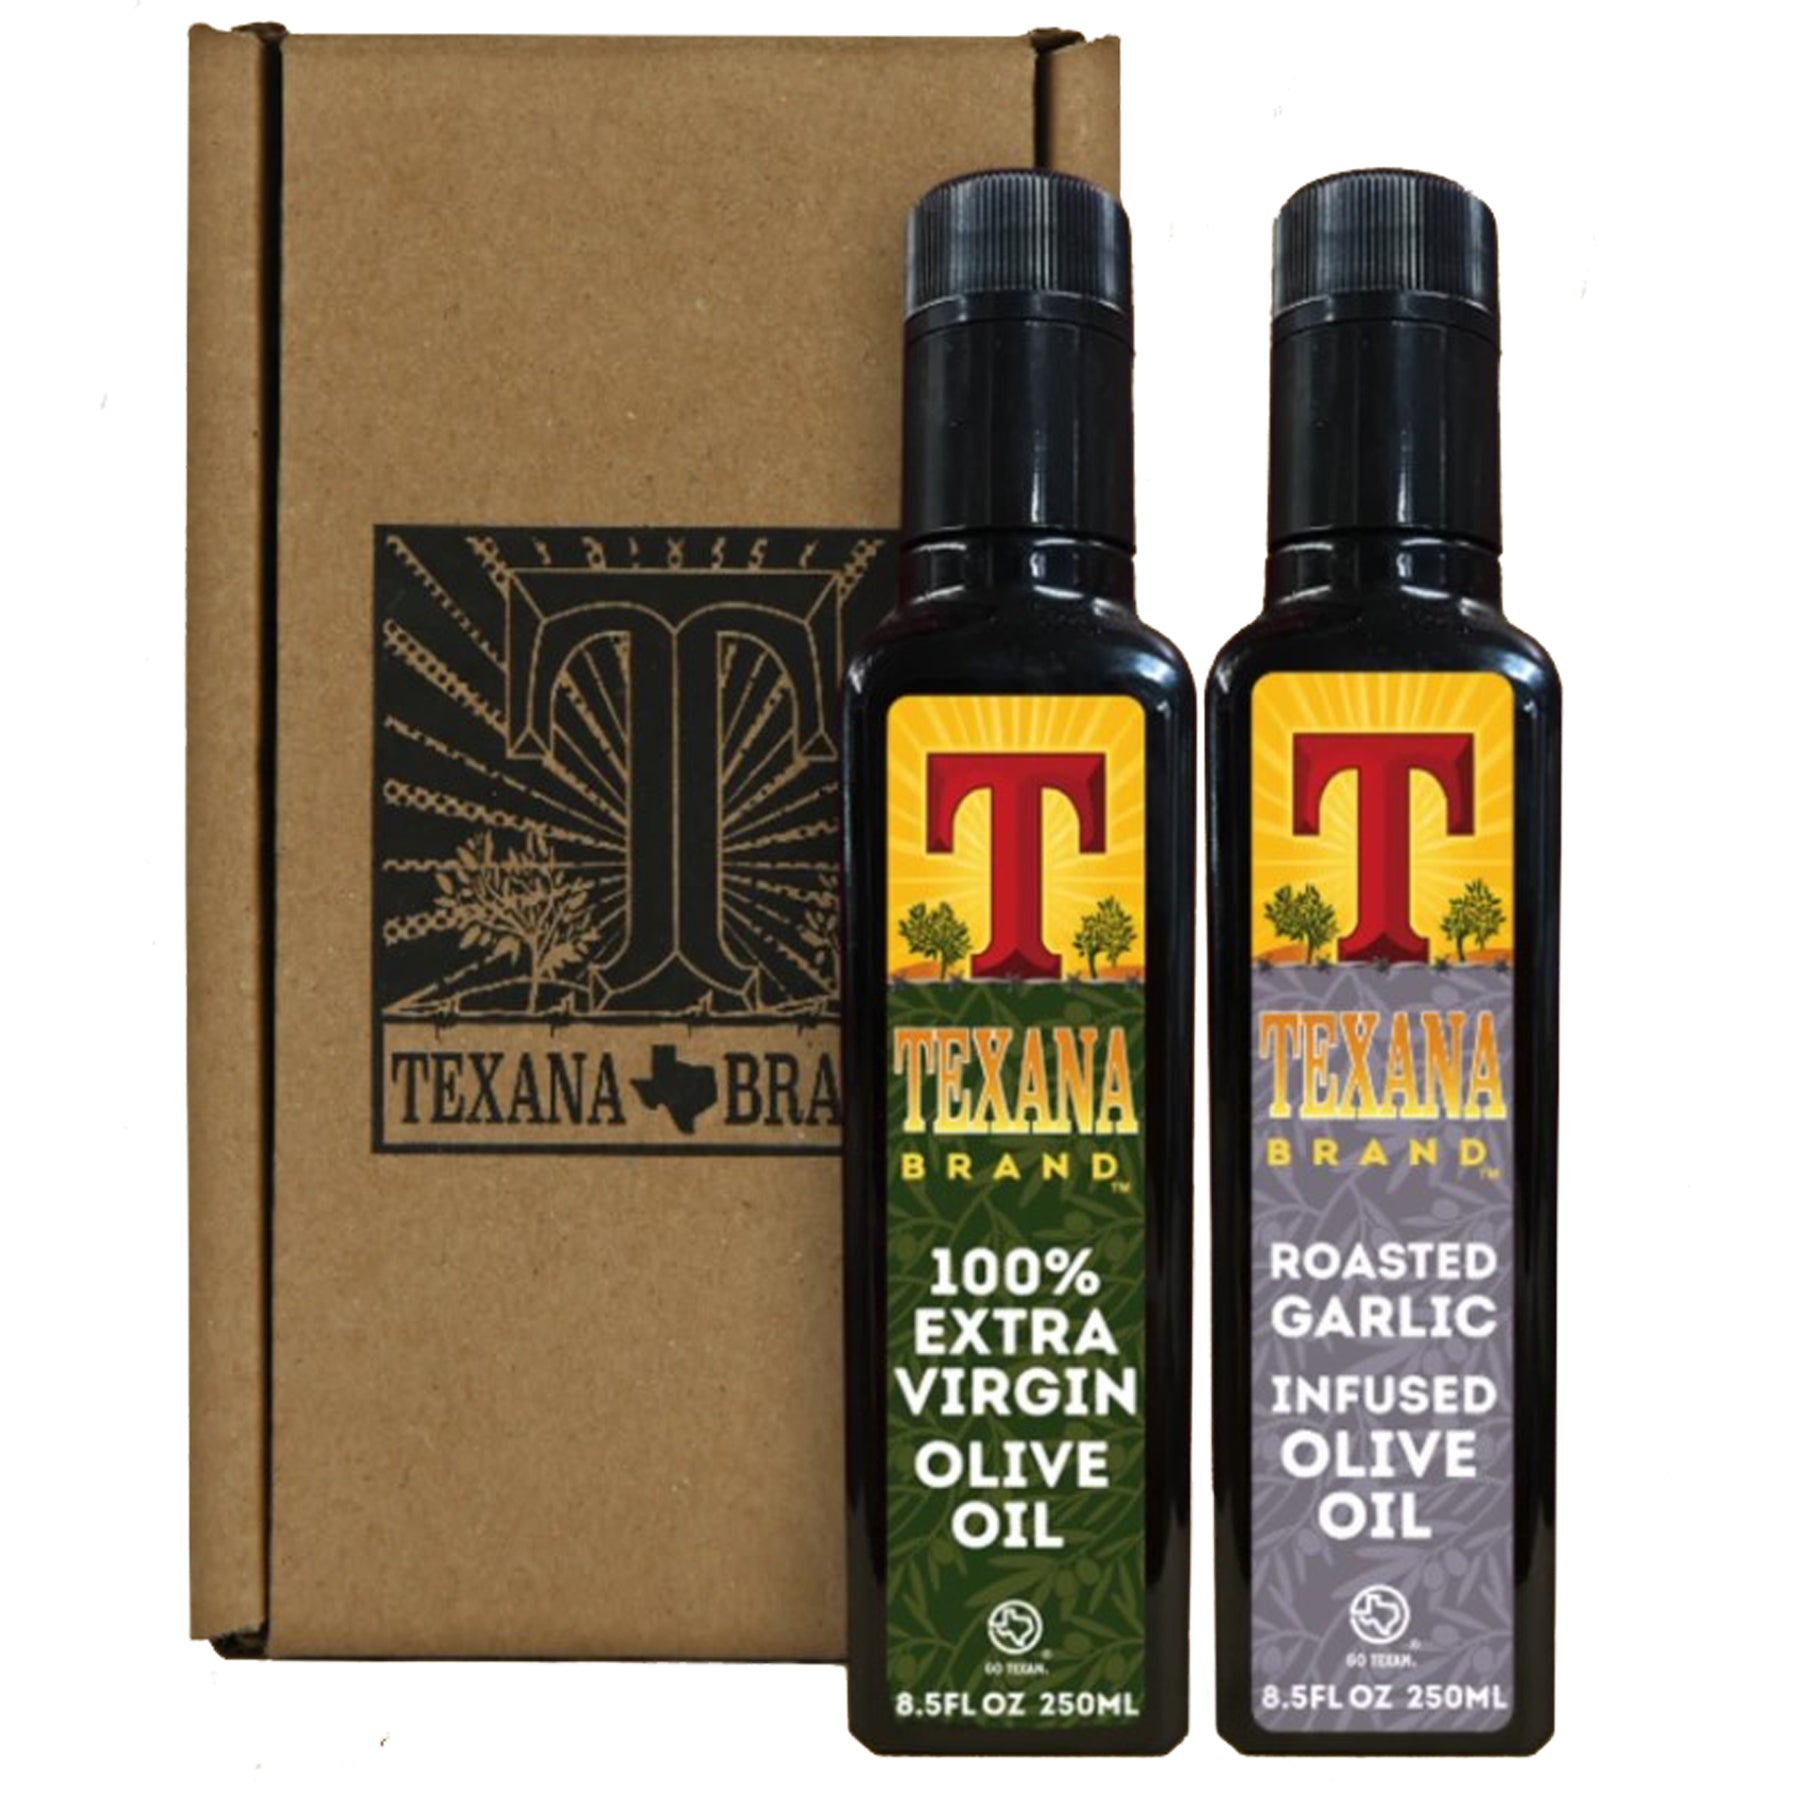 Texas Olive Oil 2-pc Gift Set, Texana Brand Extra Virgin and Roasted Garlic